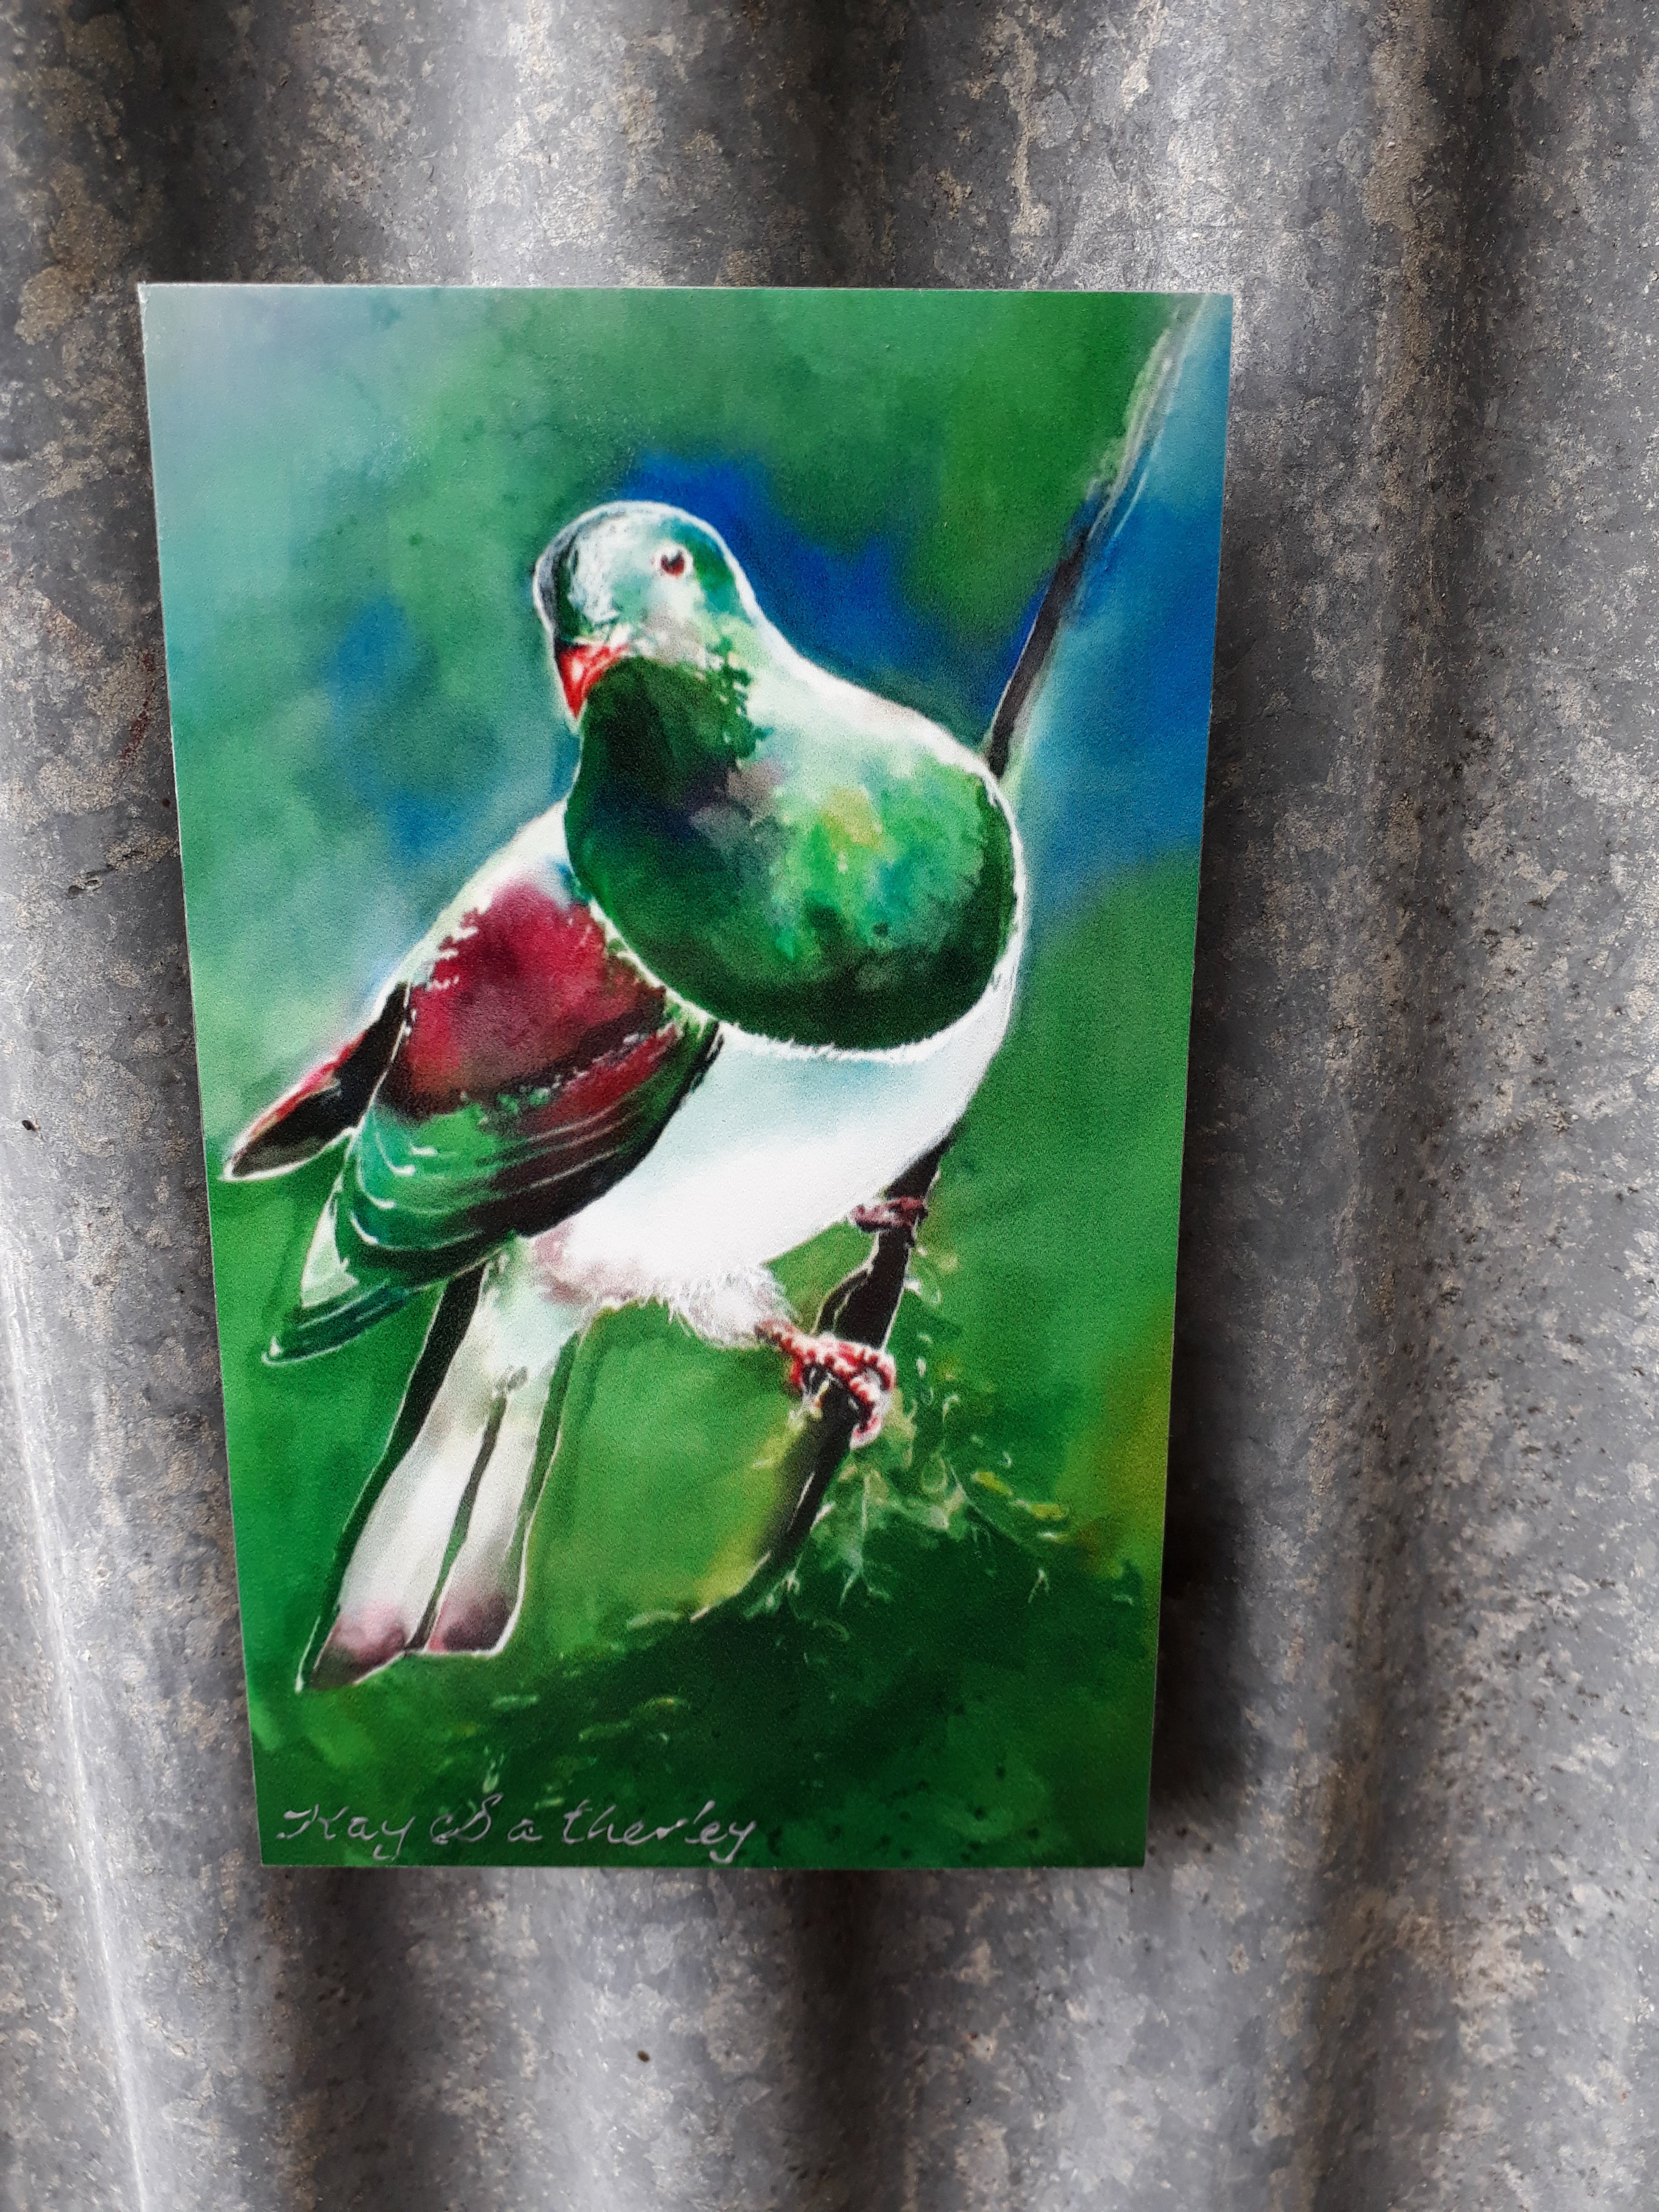 Special Trio of Kereru, Tui, and Fantail - Outdoor Art Mini Panels - Satherley Silks NZ